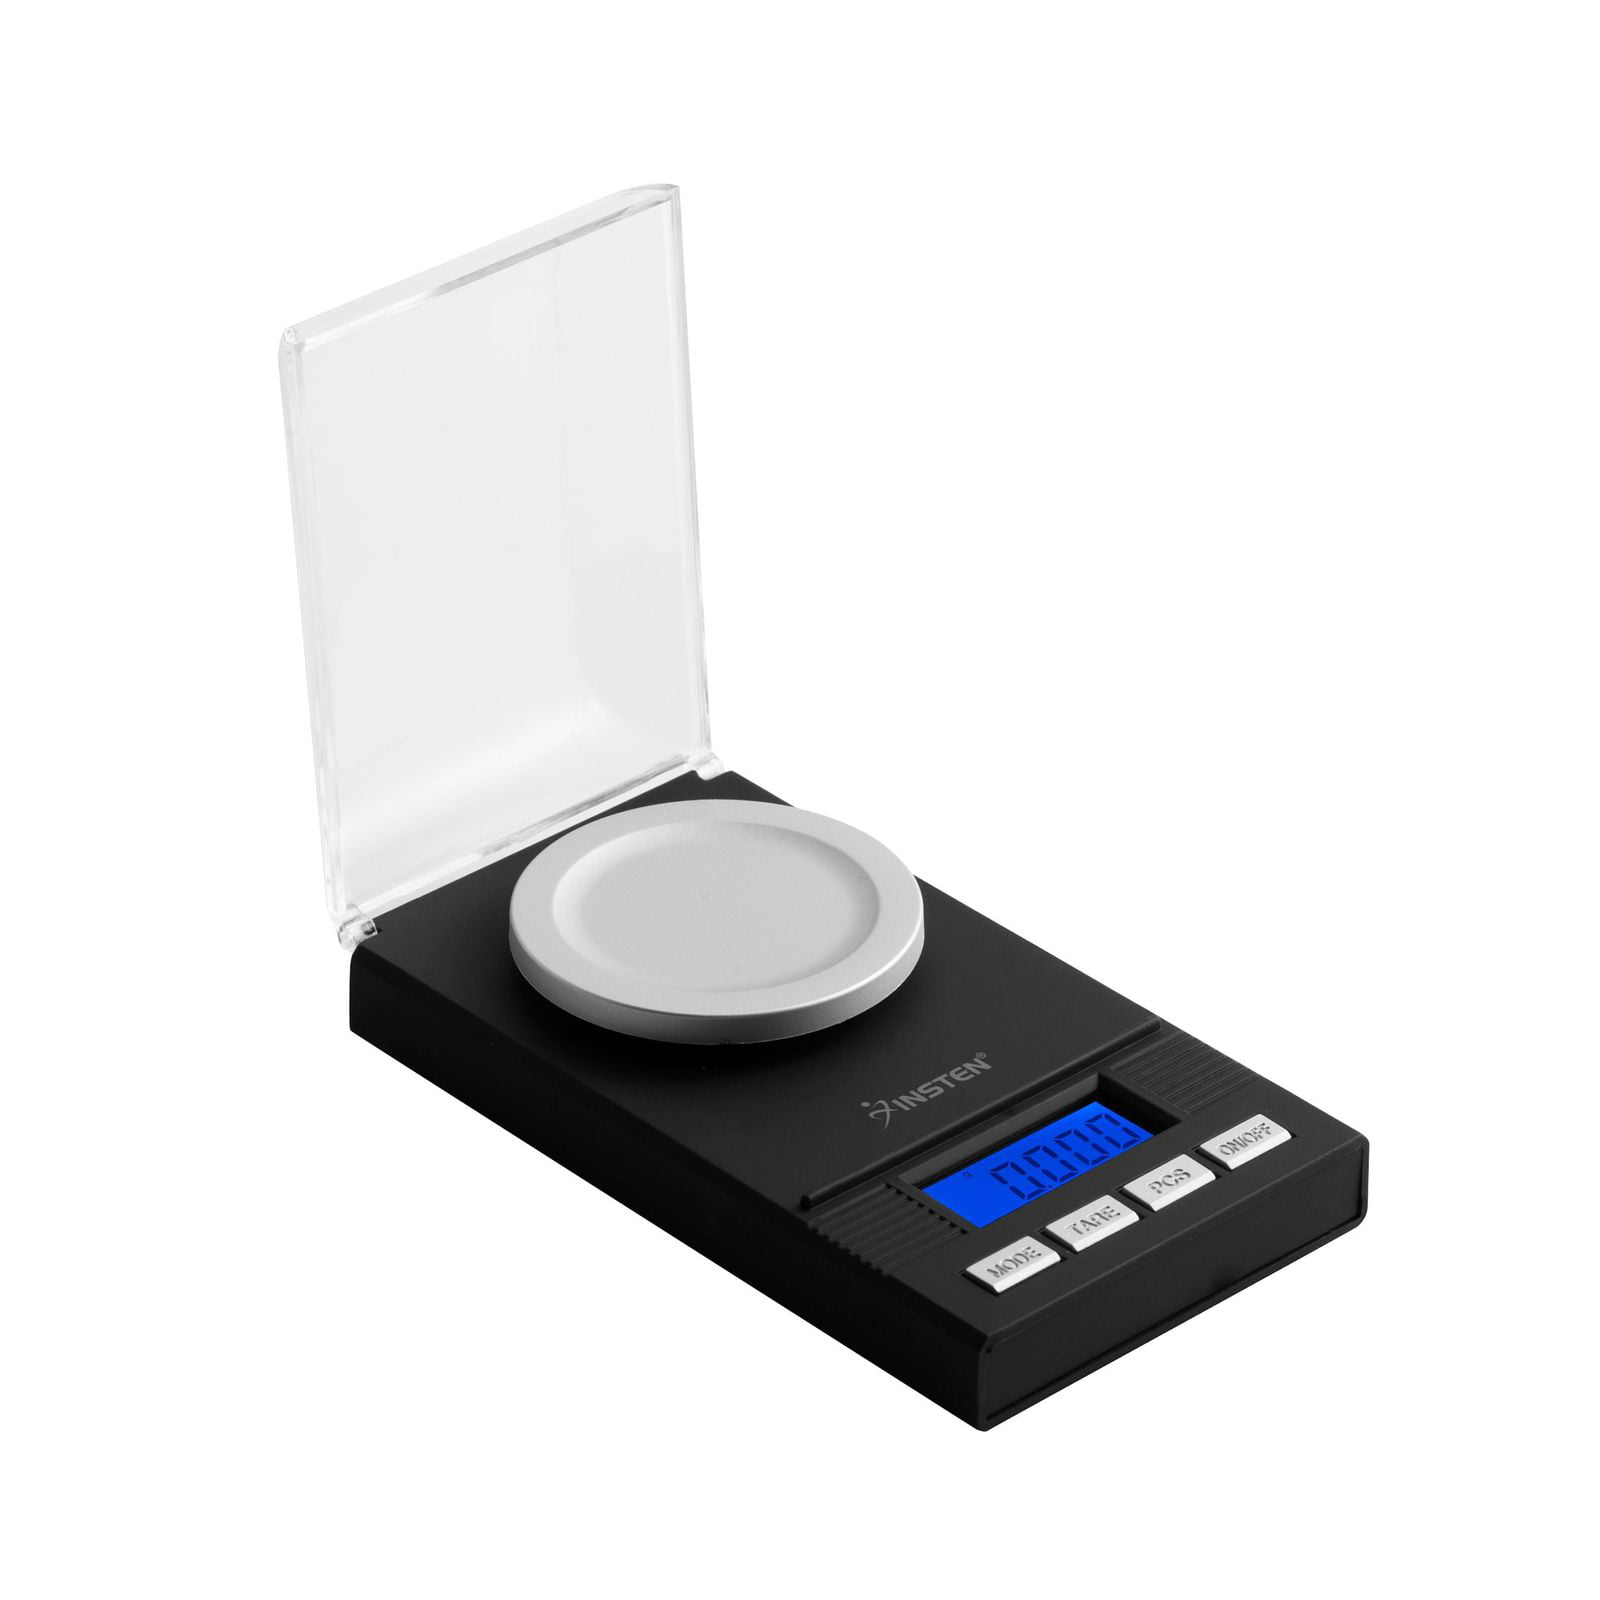 0.001/0.01g-50/500gram Digital Electronic Balance Jewelry Coin Weight Gram Scale 